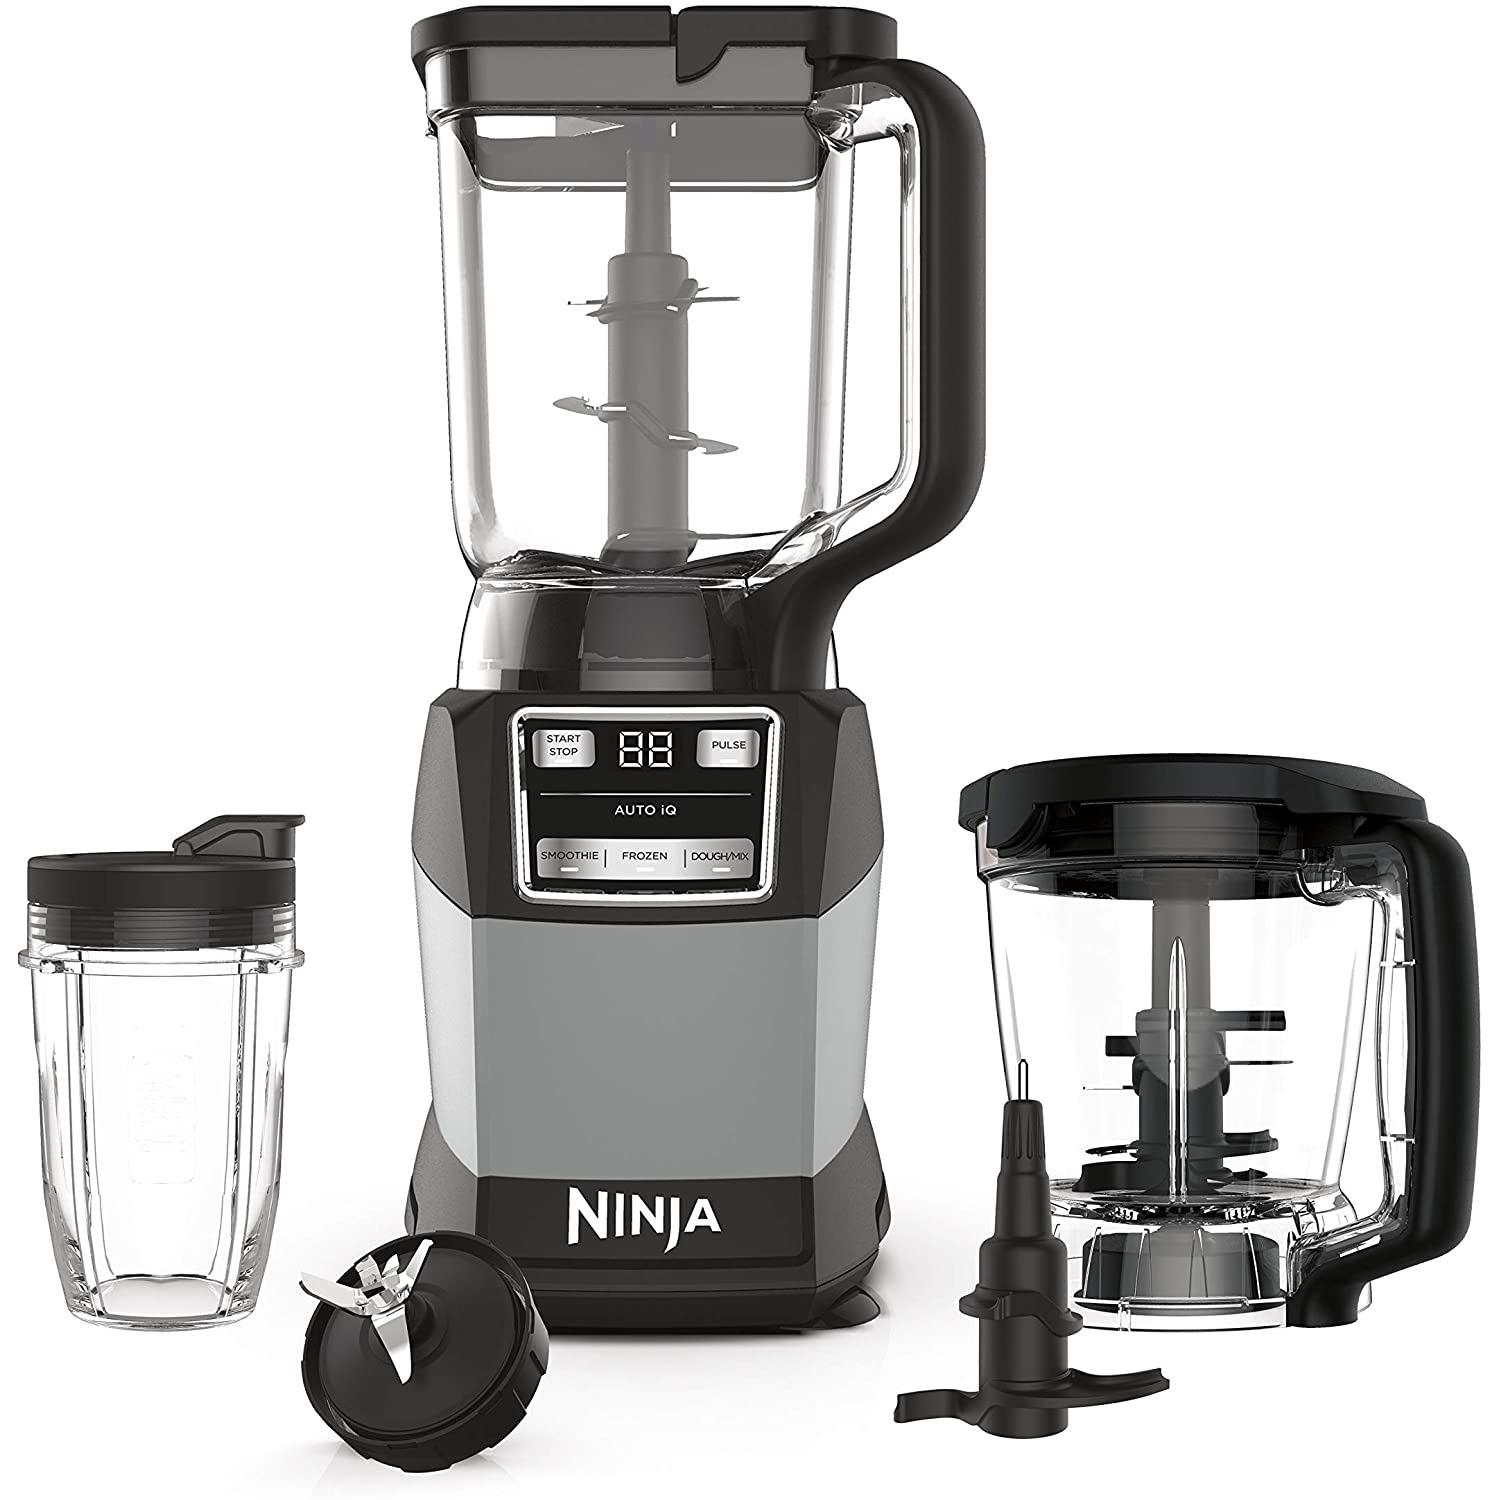 Ninja 1200W Compact Kitchen System with Blender and Bowl for $109.99 Shipped